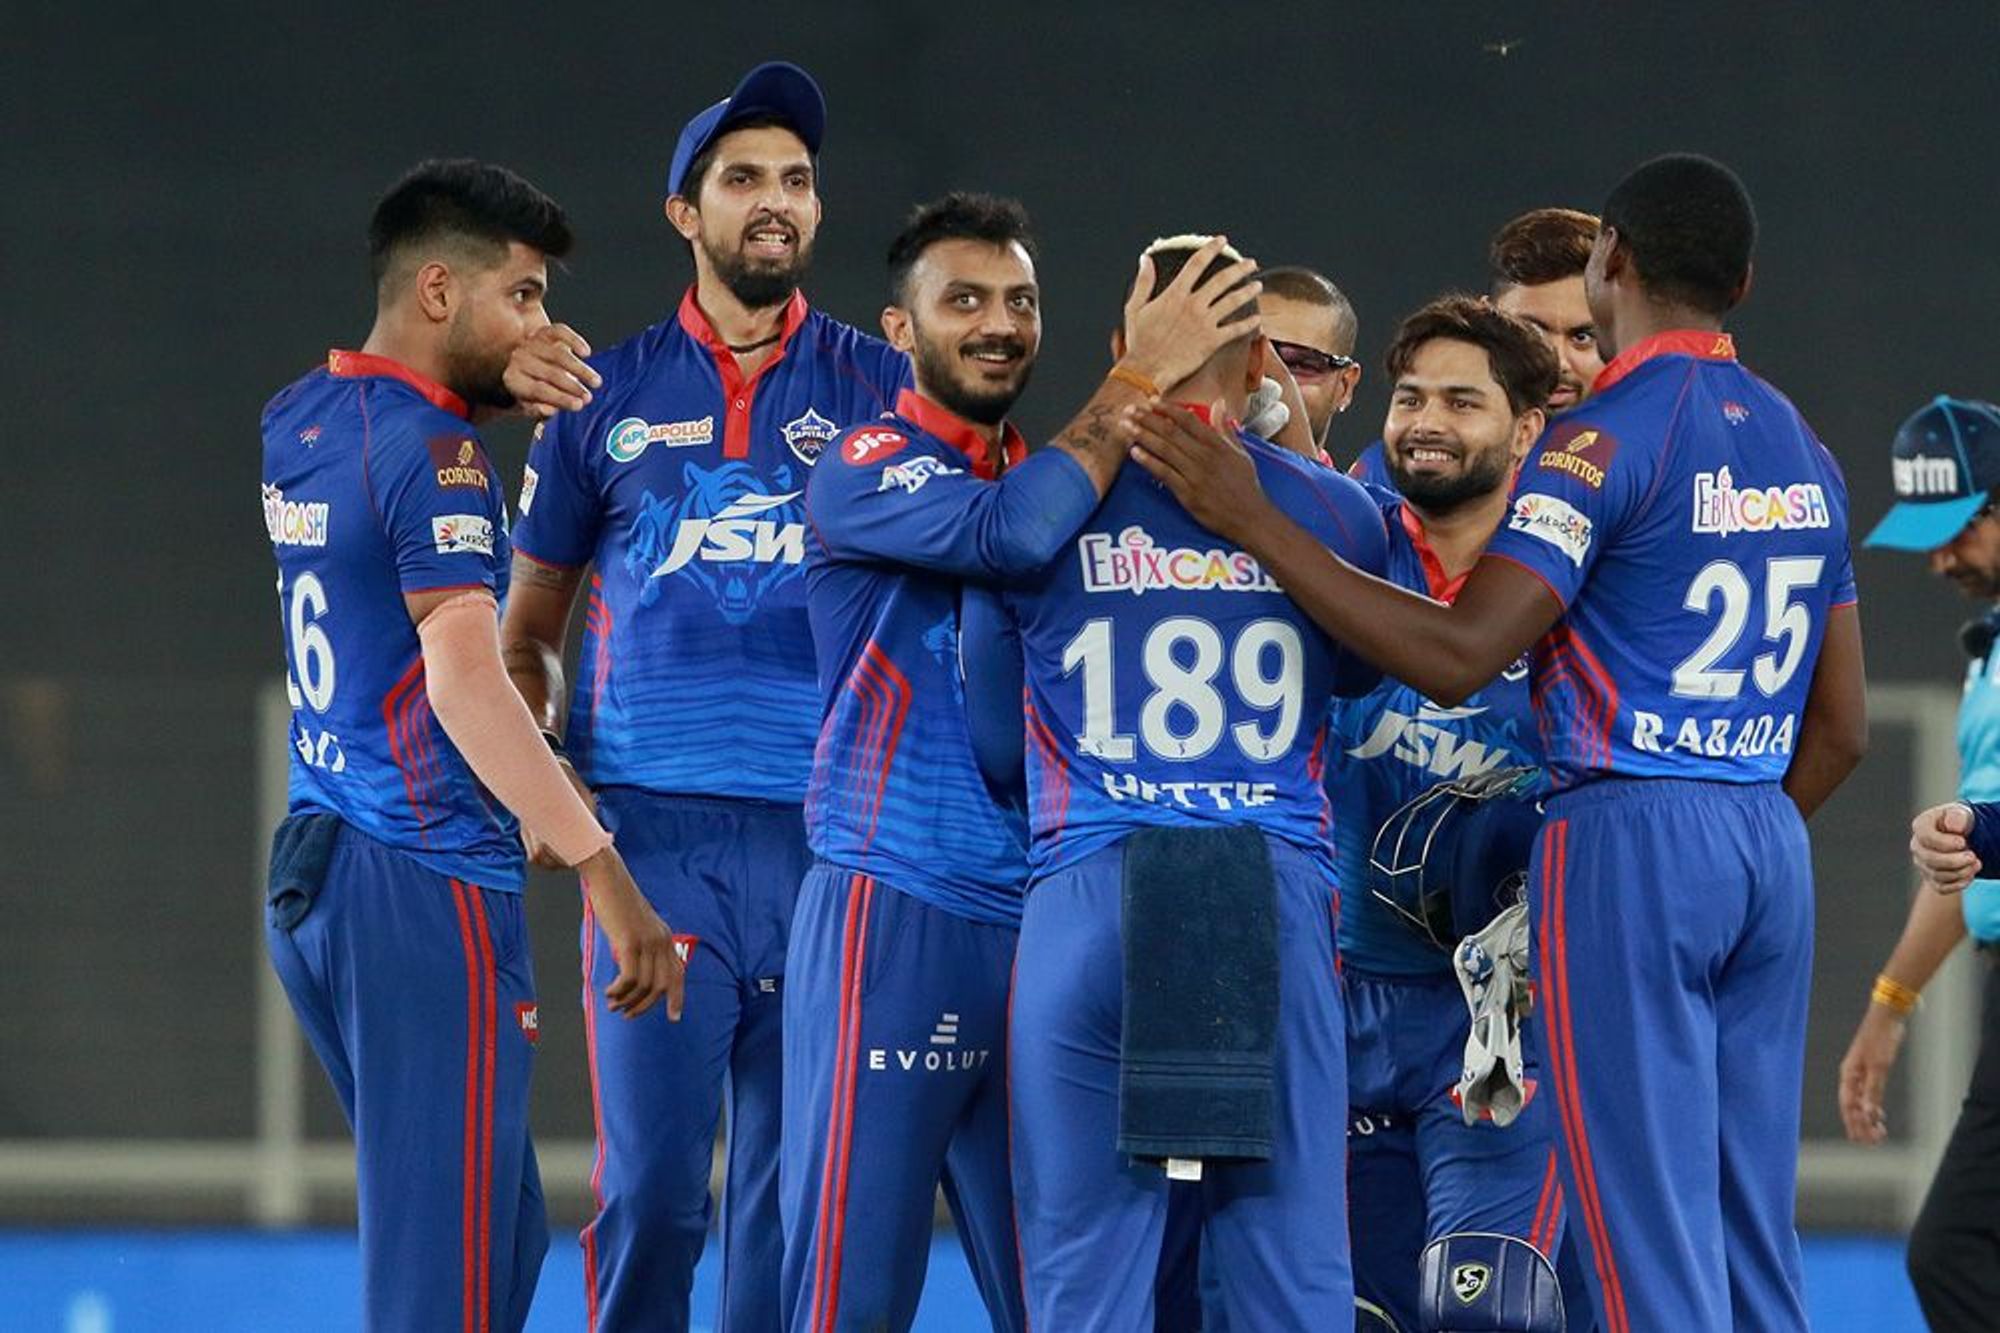 DC is the best team in the IPL 2021 | BCCI/IPL